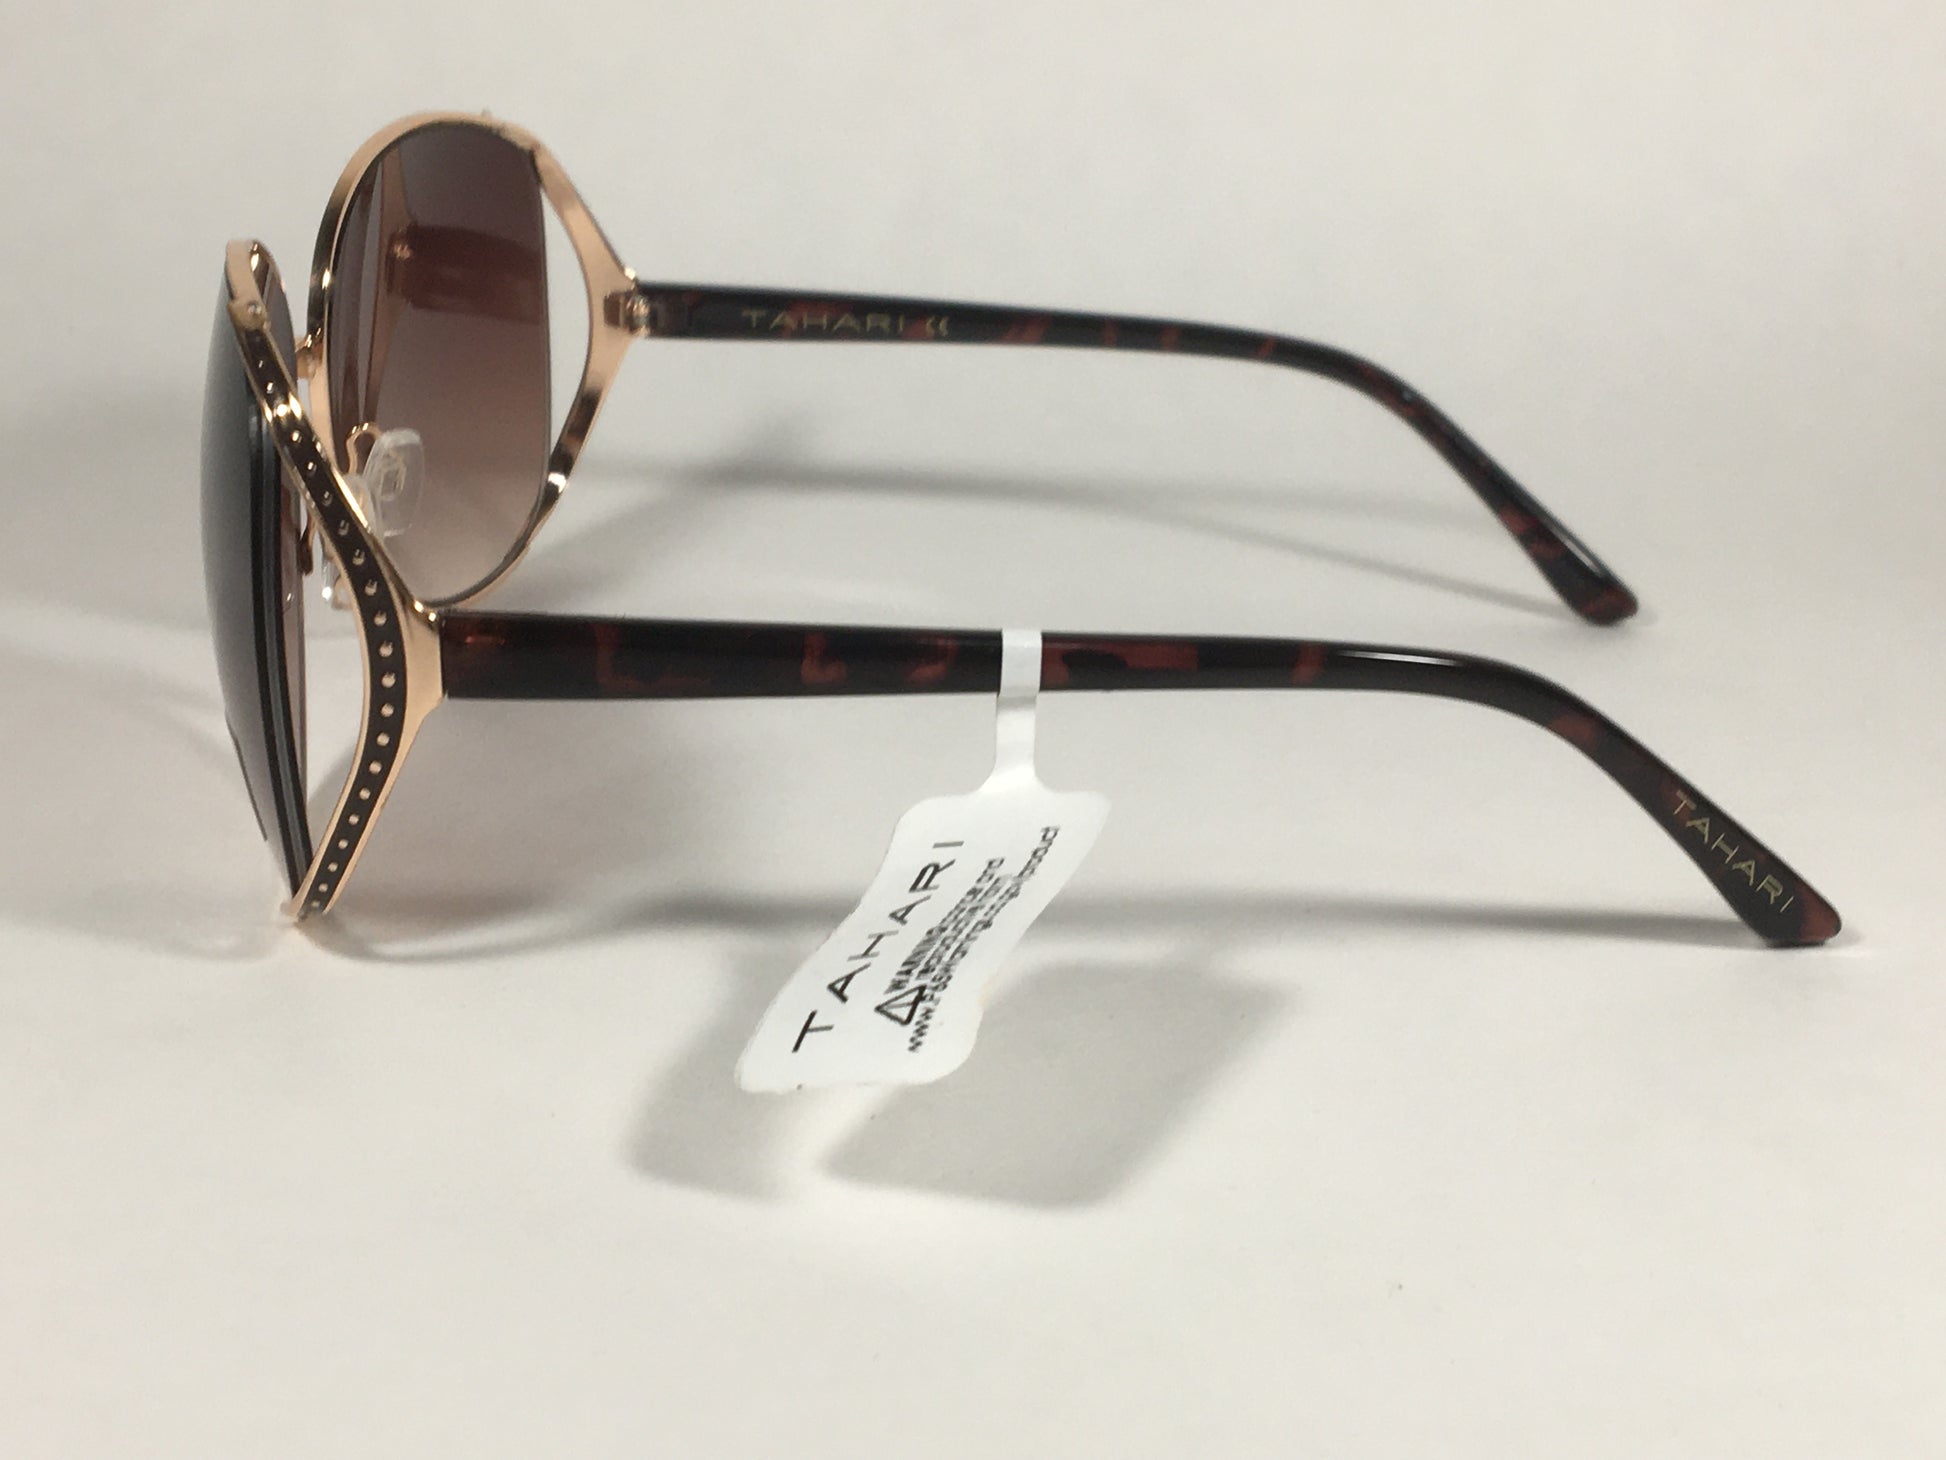 Tahari Oversized Sunglasses Gold And Brown Tortoise Frame Brown Gradient Lens TH751 GLDTS - Sunglasses